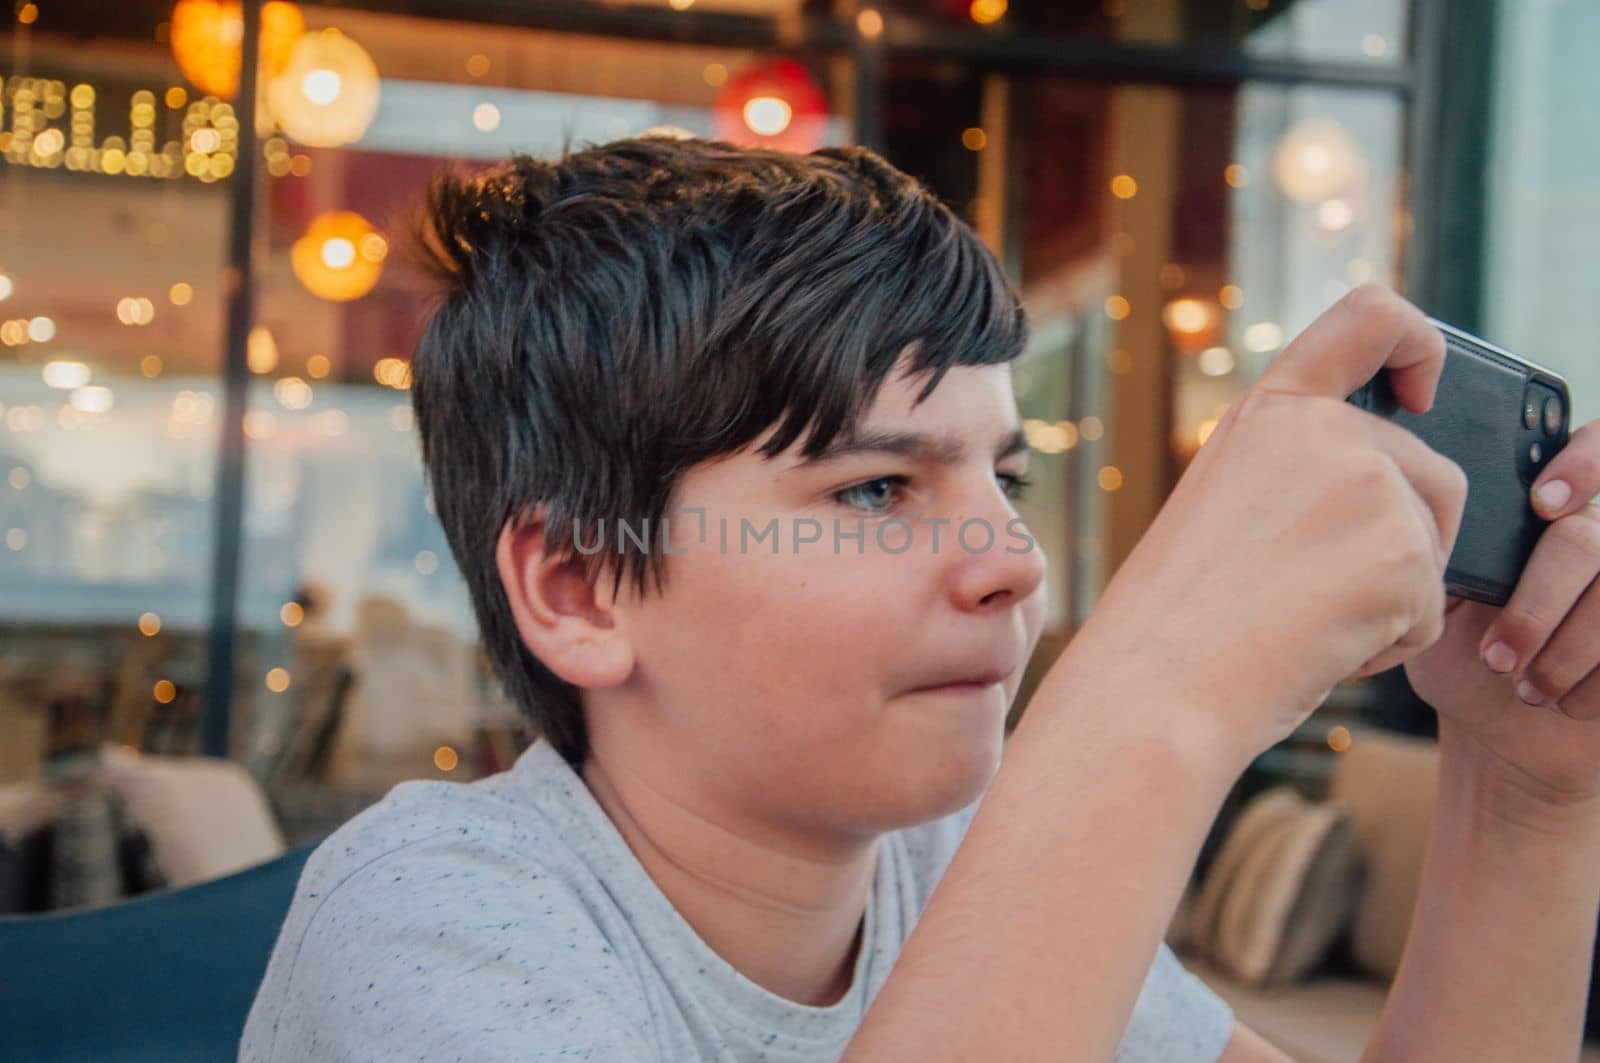 Portrait of young boy playing mobile phone games in a bar, with concentrated expression.